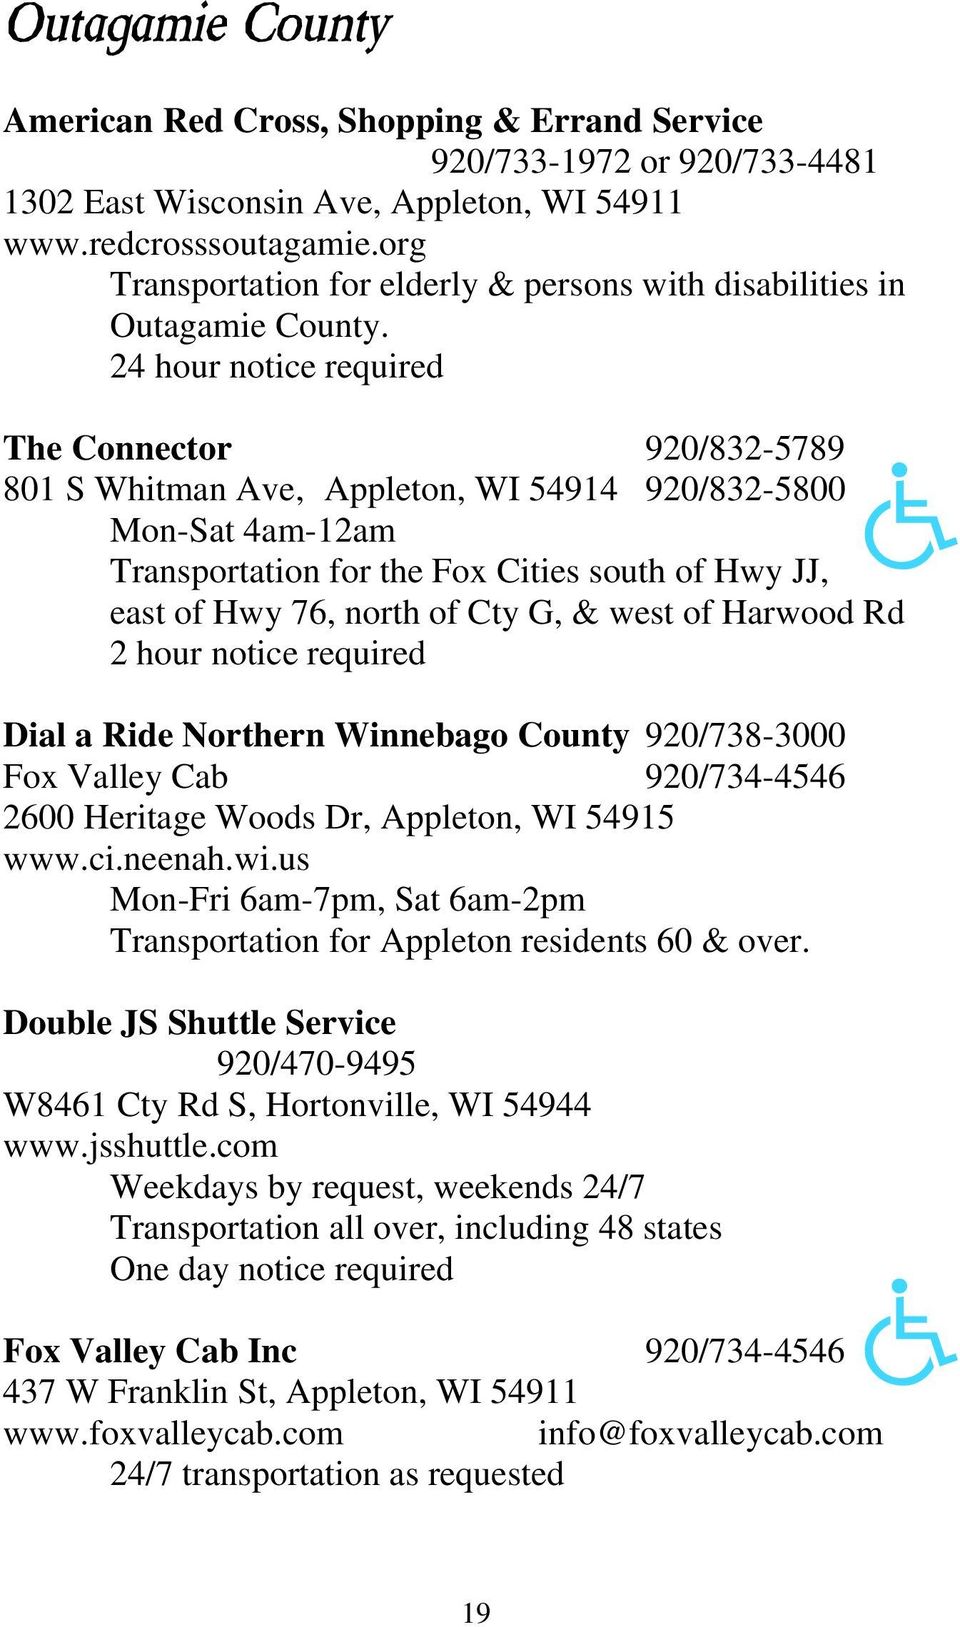 24 hour notice required The Connector 920/832-5789 801 S Whitman Ave, Appleton, WI 54914 920/832-5800 Mon-Sat 4am-12am Transportation for the Fox Cities south of Hwy JJ, east of Hwy 76, north of Cty